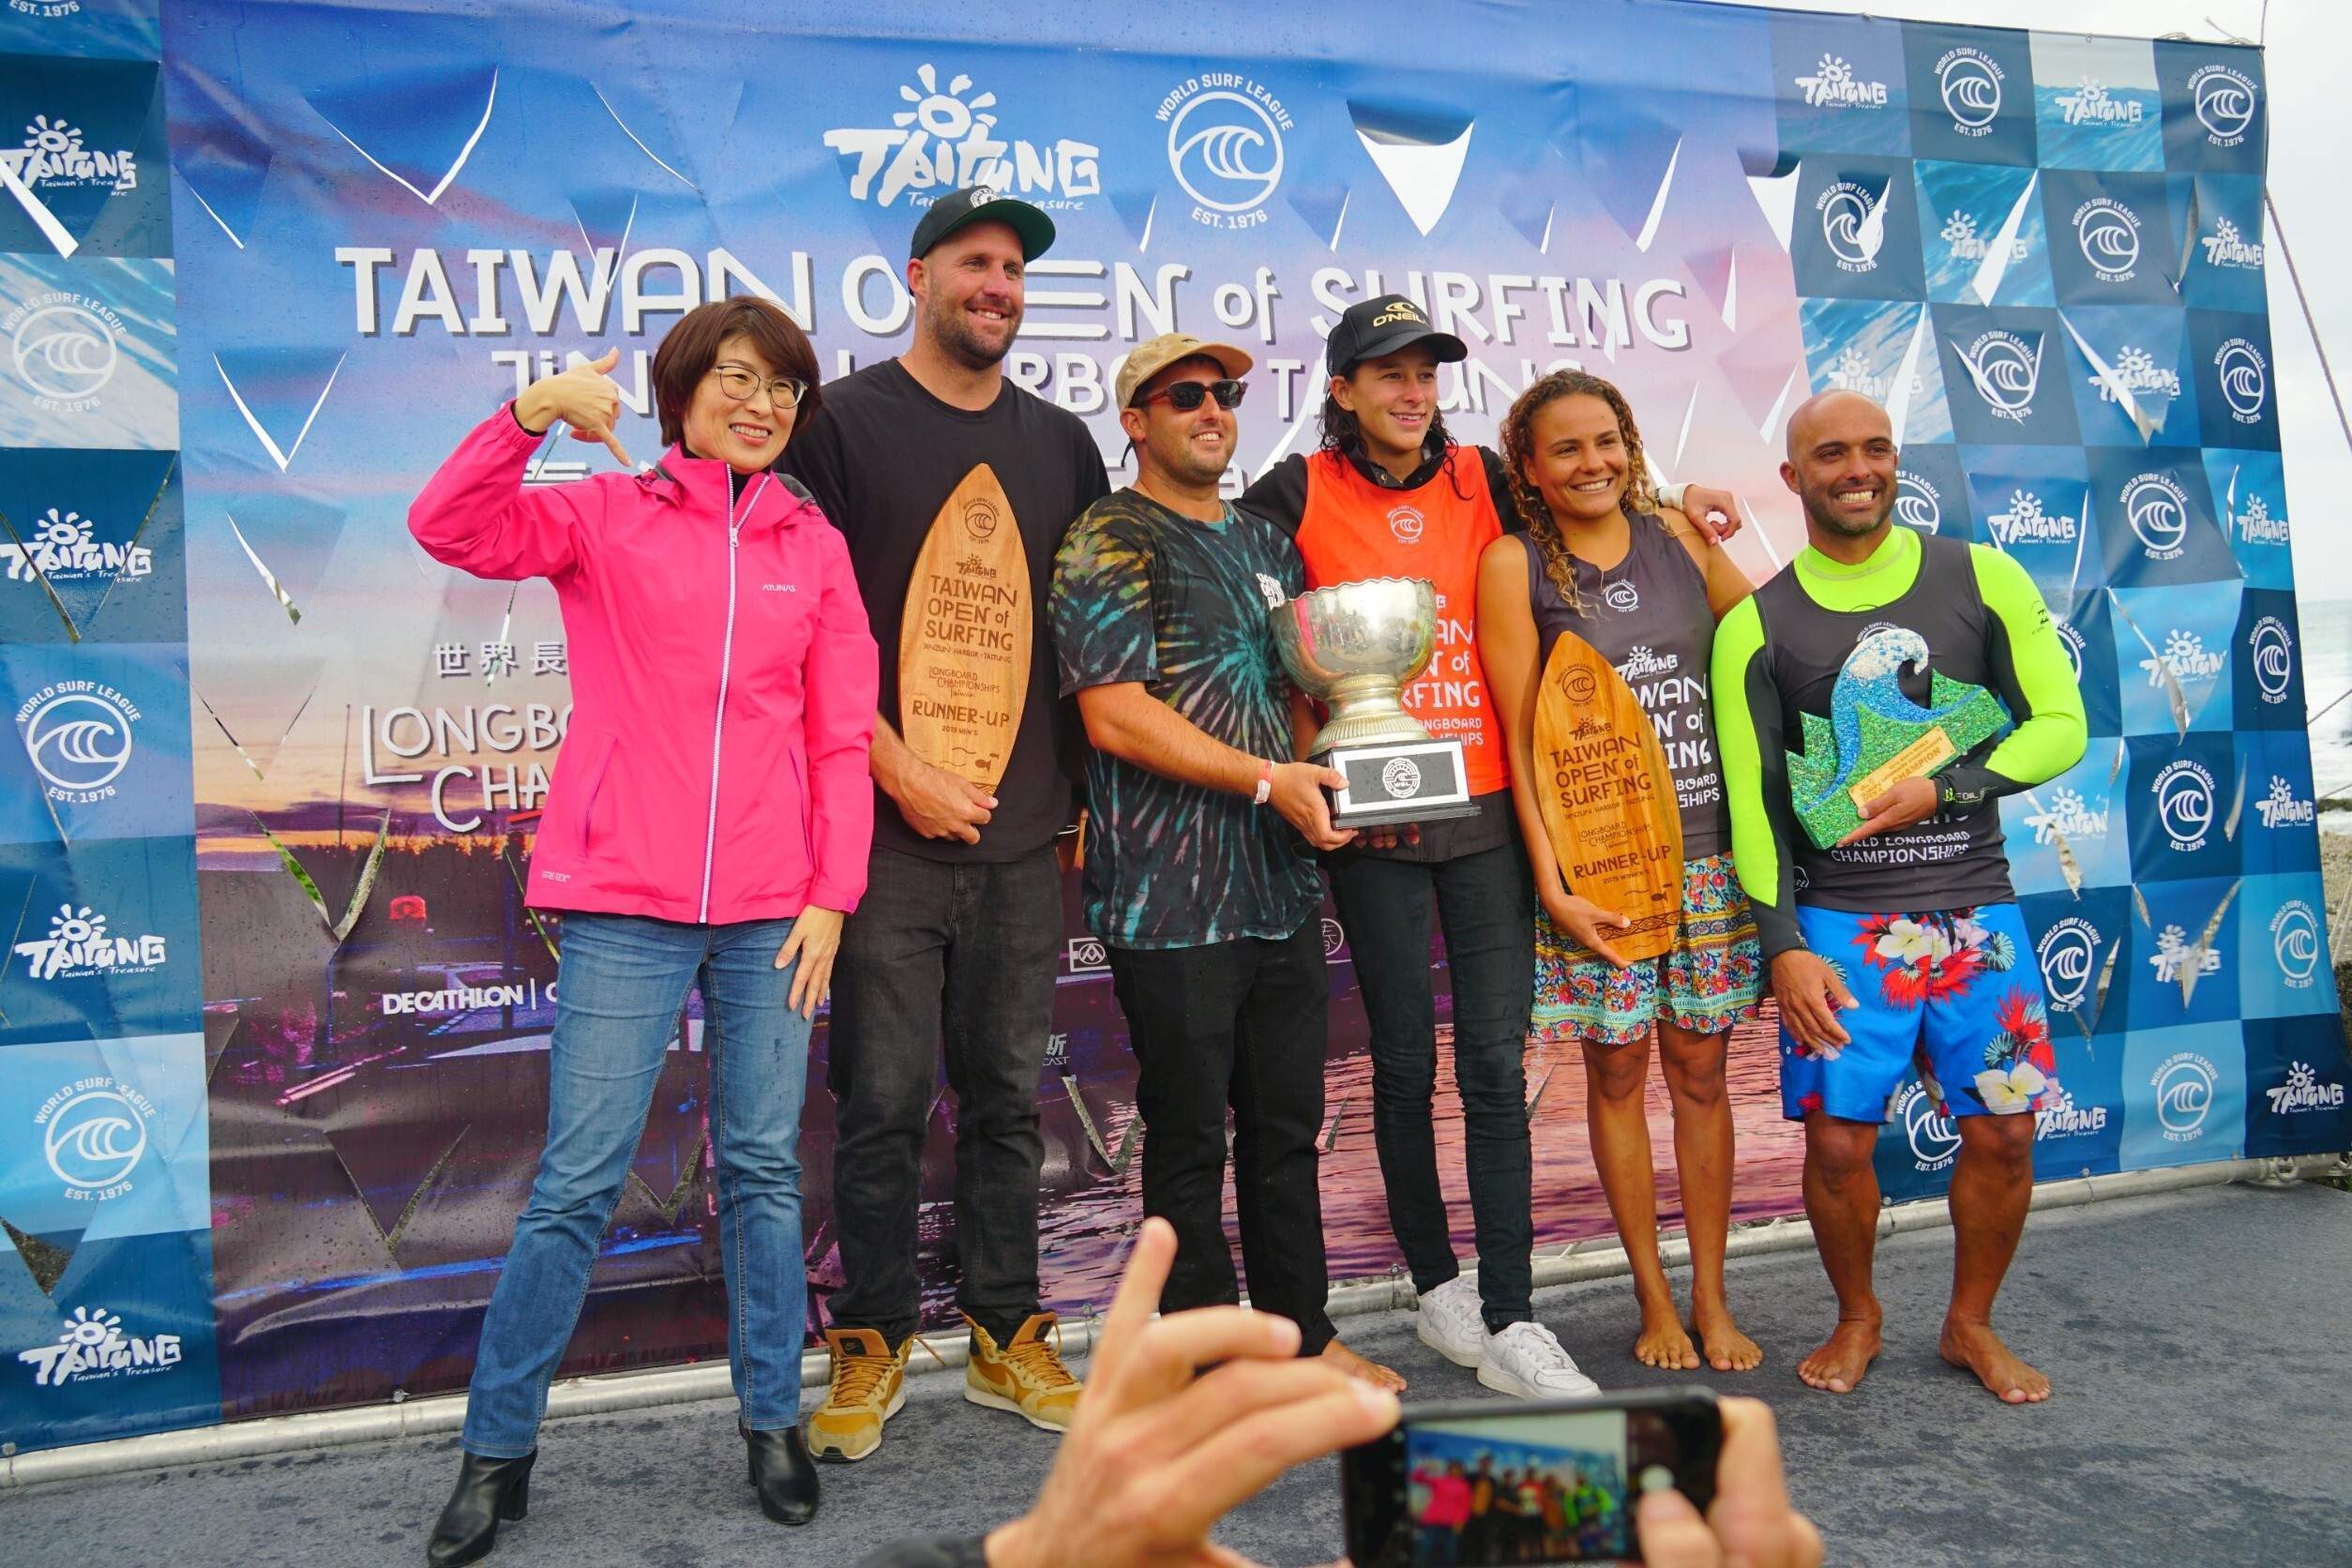 taiwan open of surfing